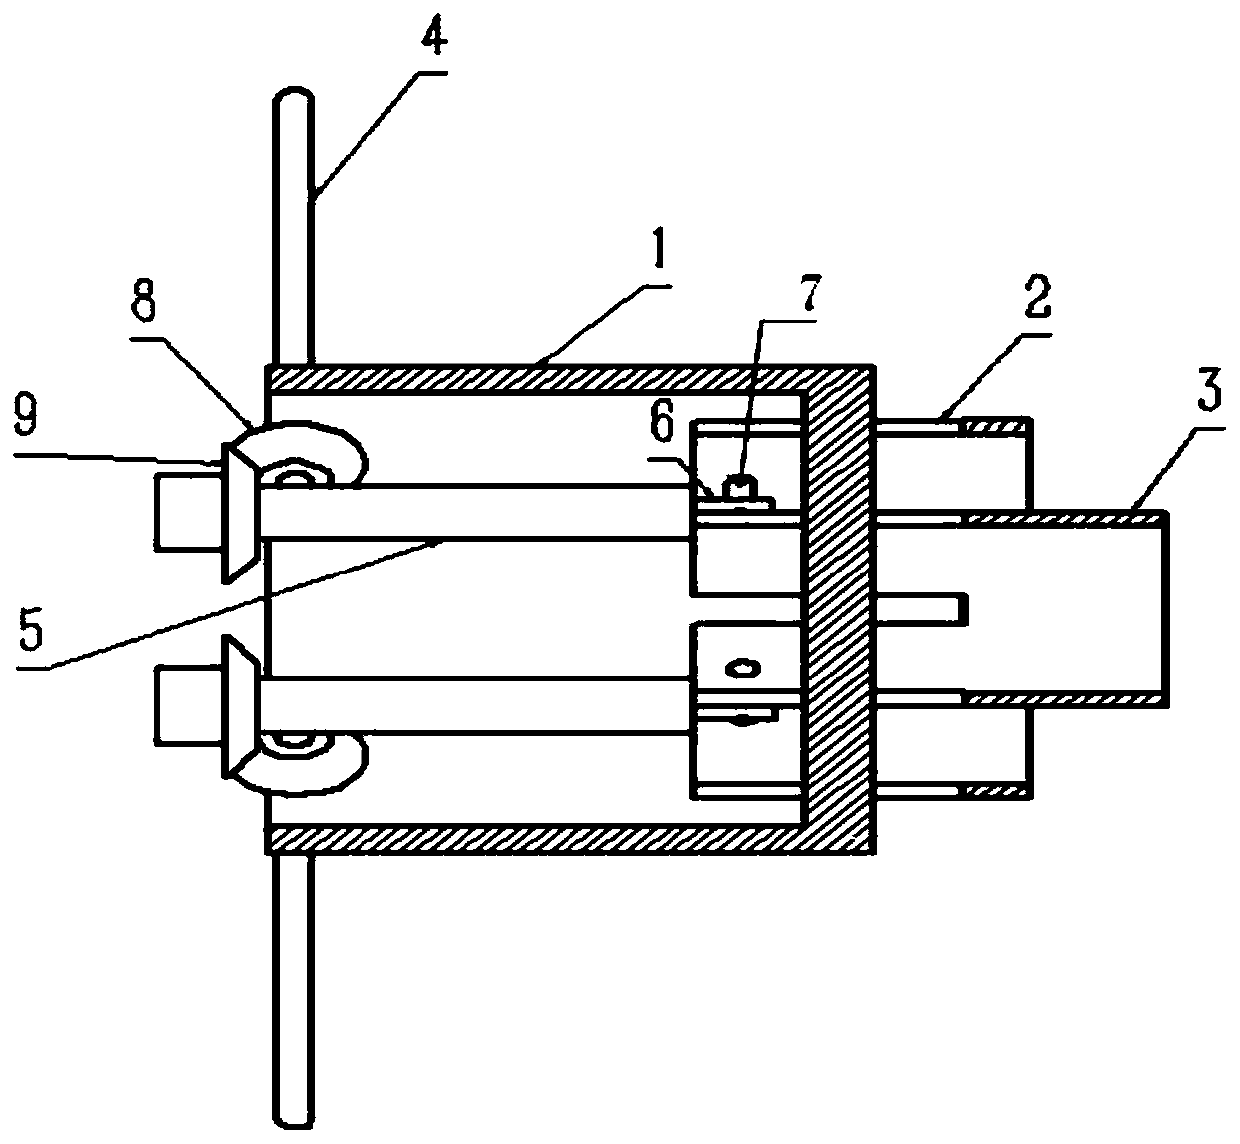 A coaxial double ring cathode online adjustment device applied in rbwo